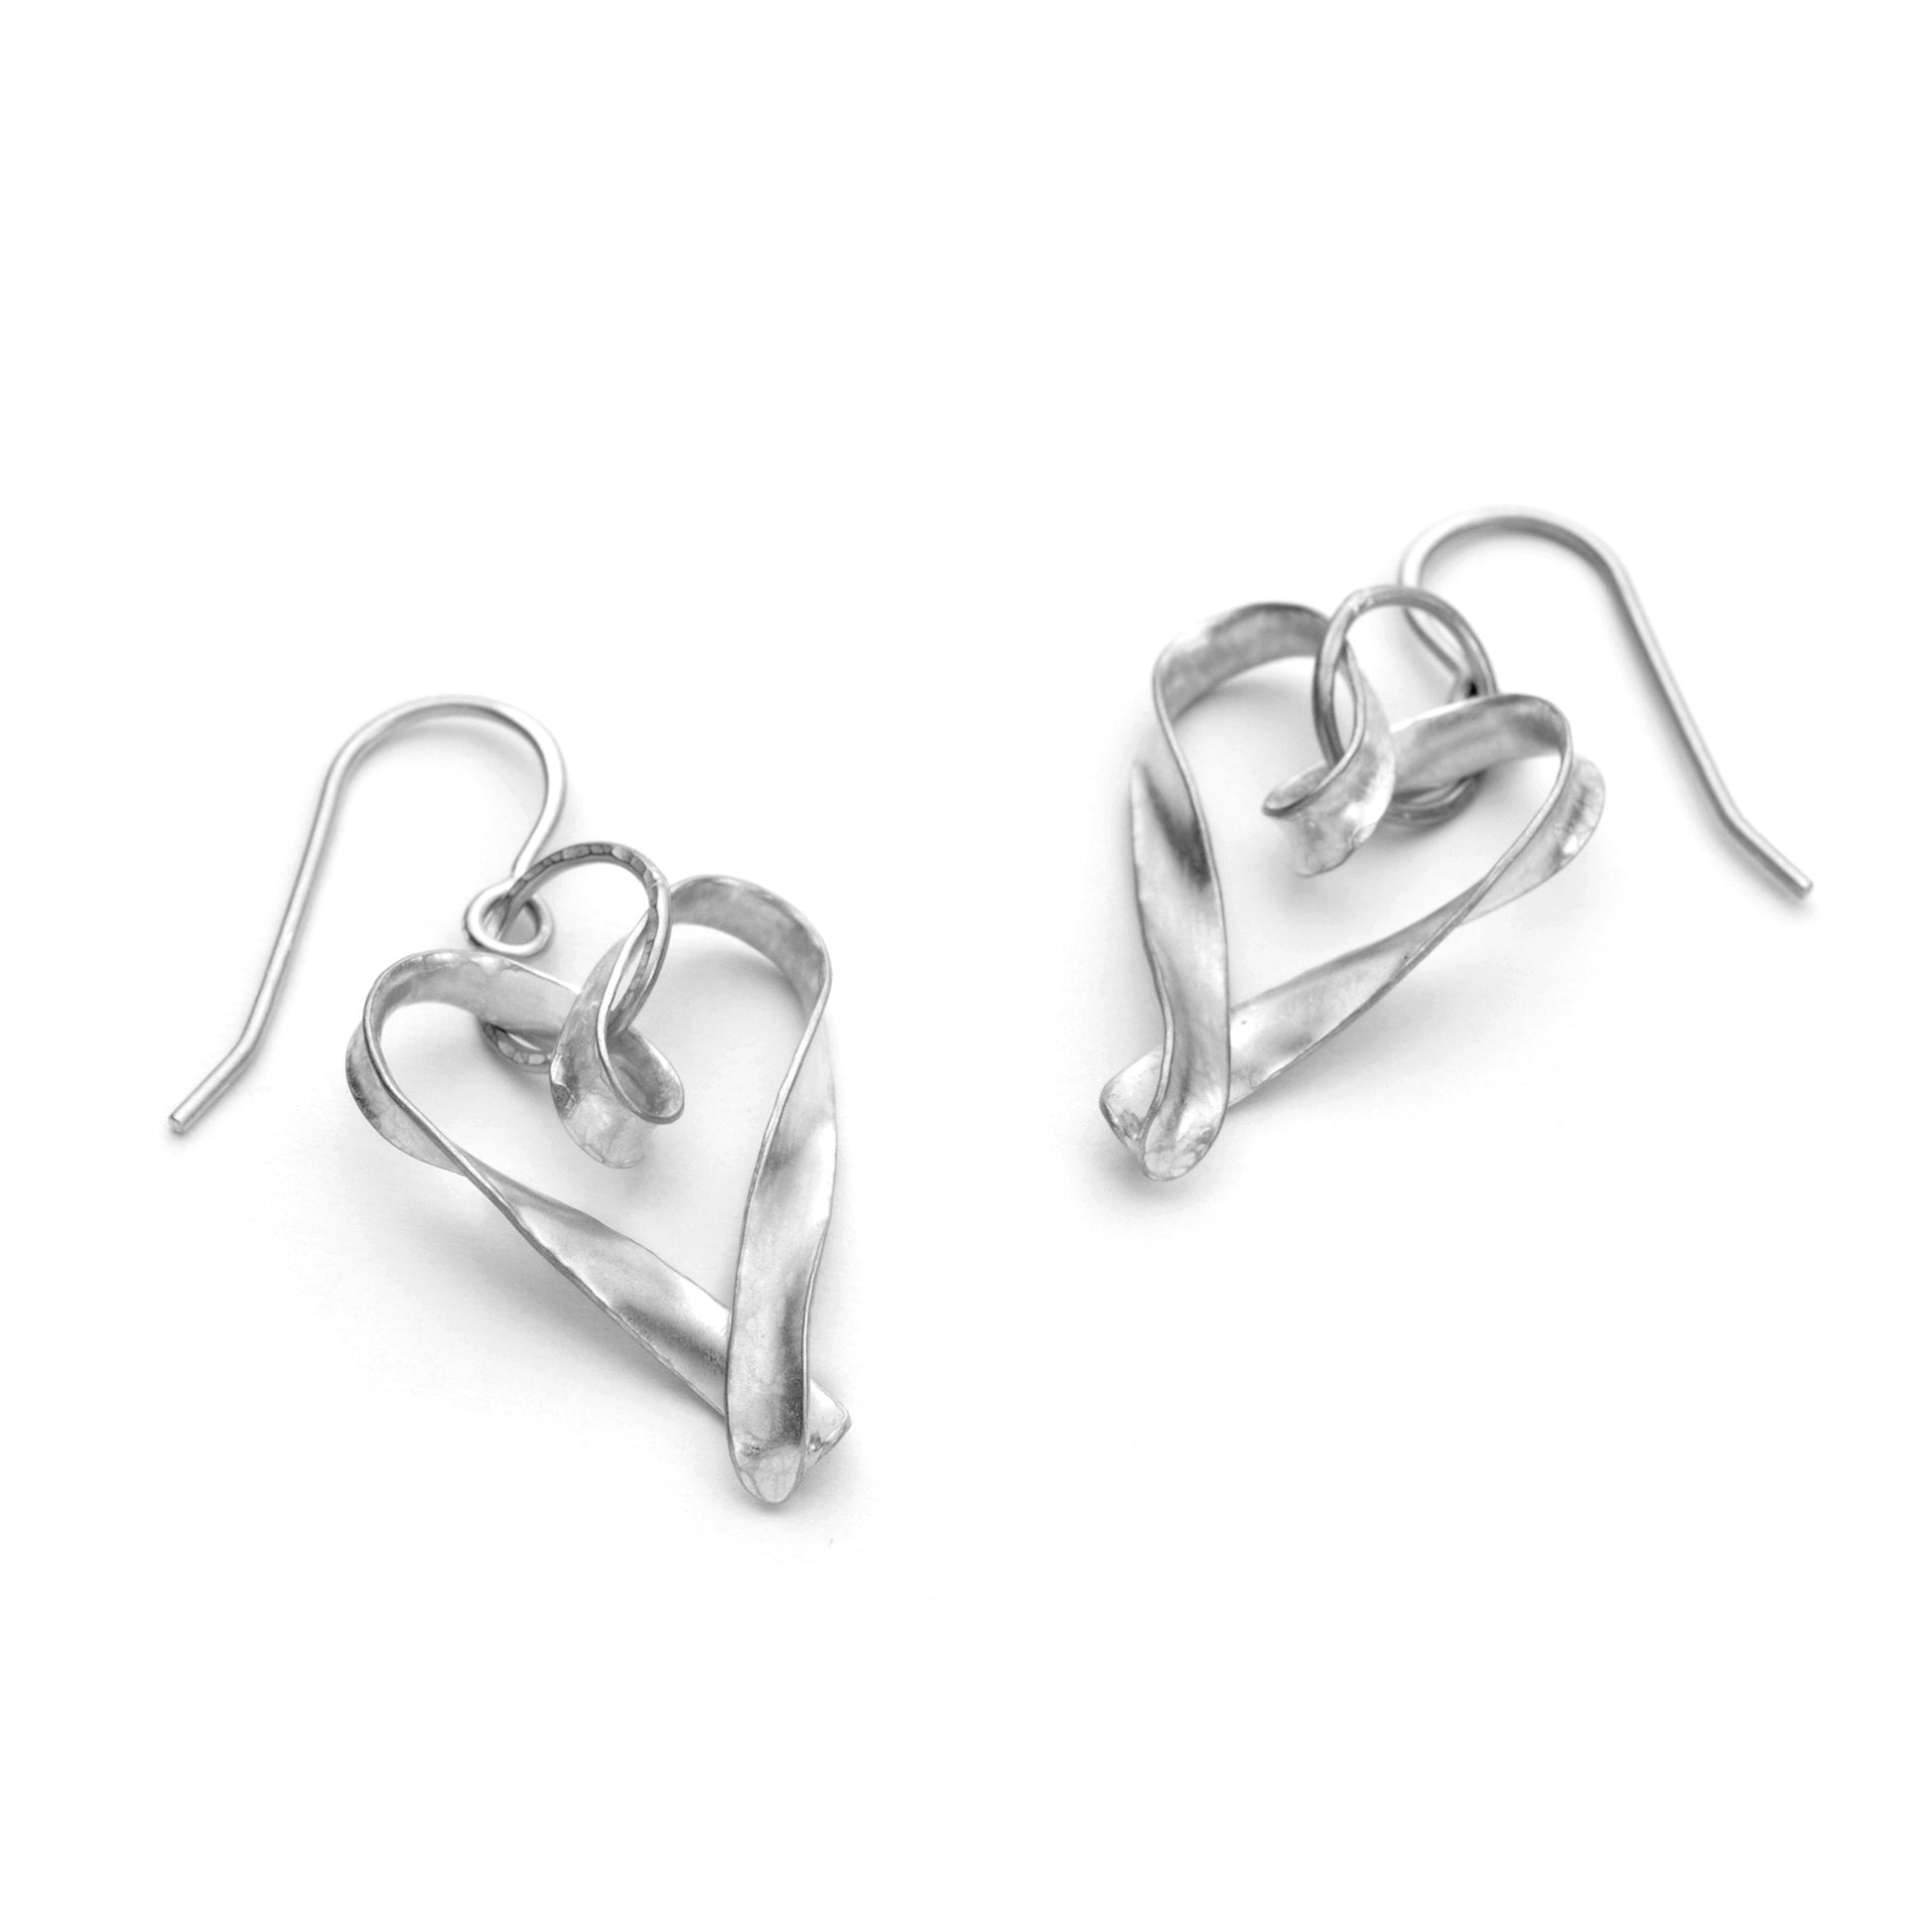 A pair of silver heart drop earrings, each formed from a single ribbon of metal, twisted and joined at the point. They are attached to the ear wire by a large, hammer textured jump ring. They are seen here lying on a surface.